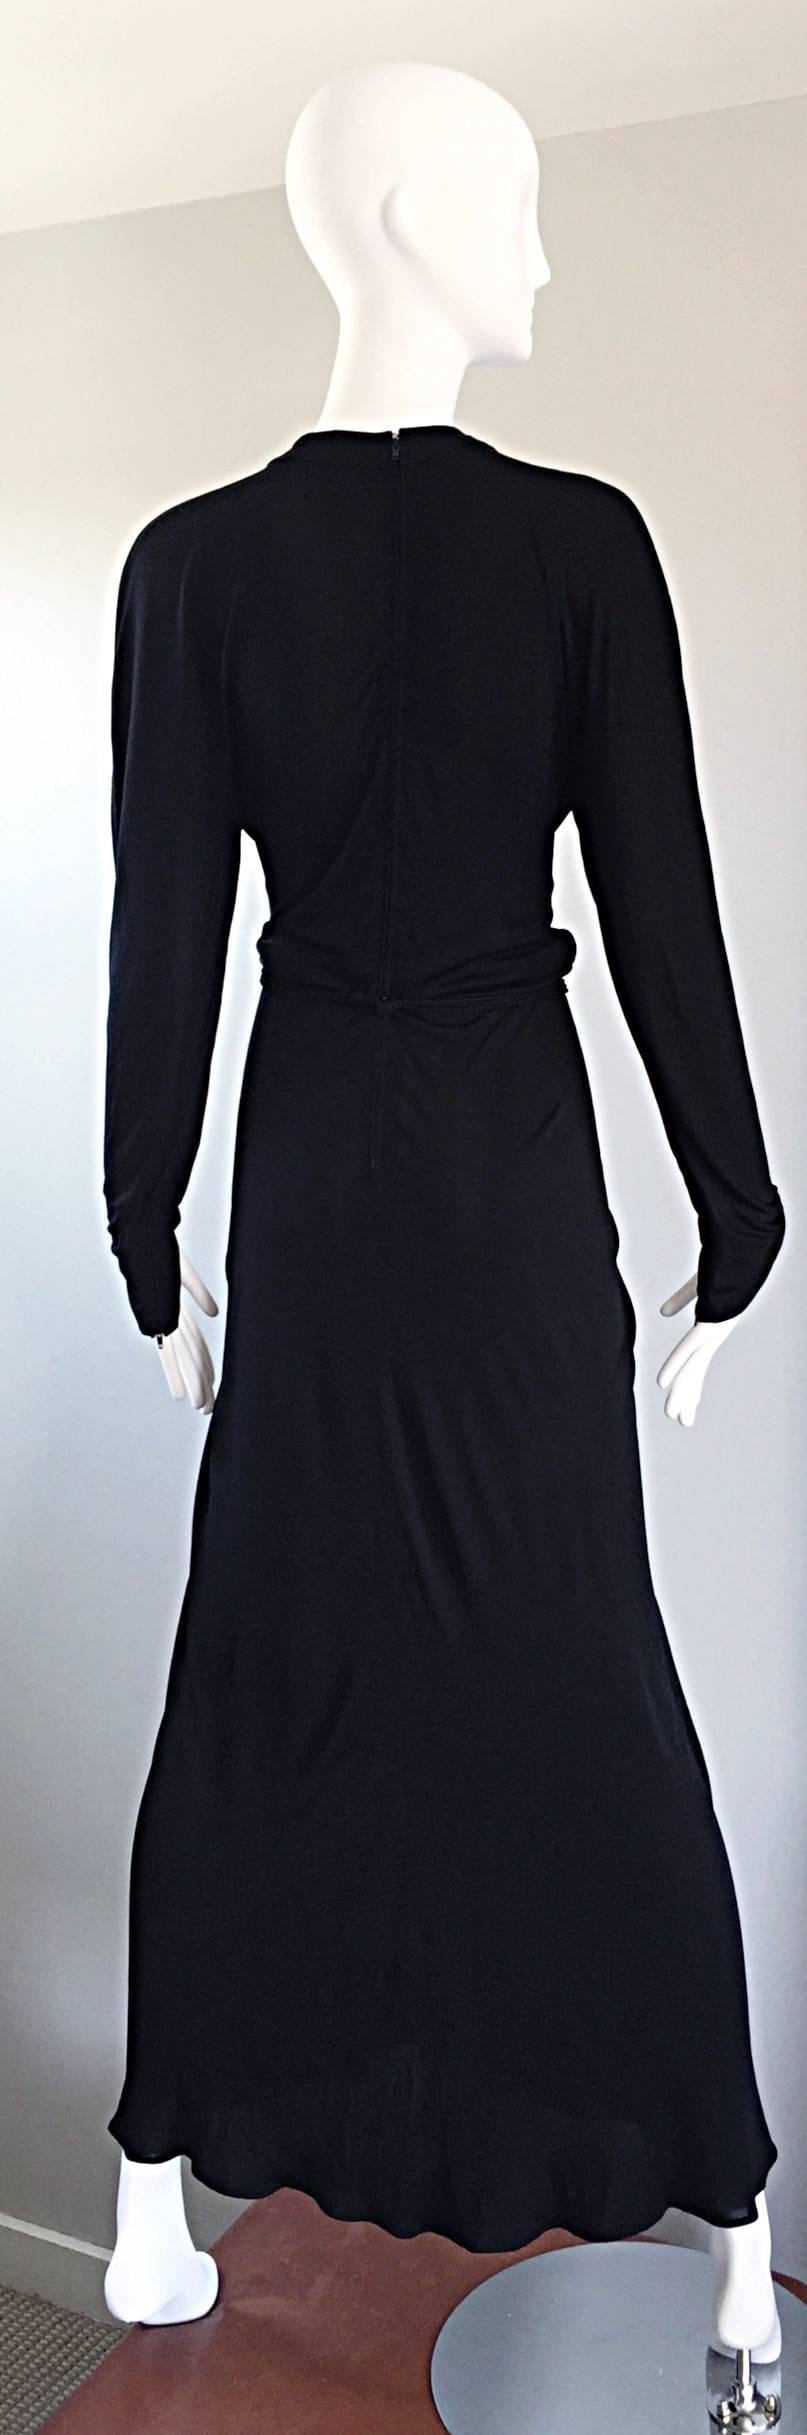 Nina Ricci Vintage 1970s Long Sleeve Jersey Grecian Inspired Black Disco Dress In Excellent Condition For Sale In San Diego, CA